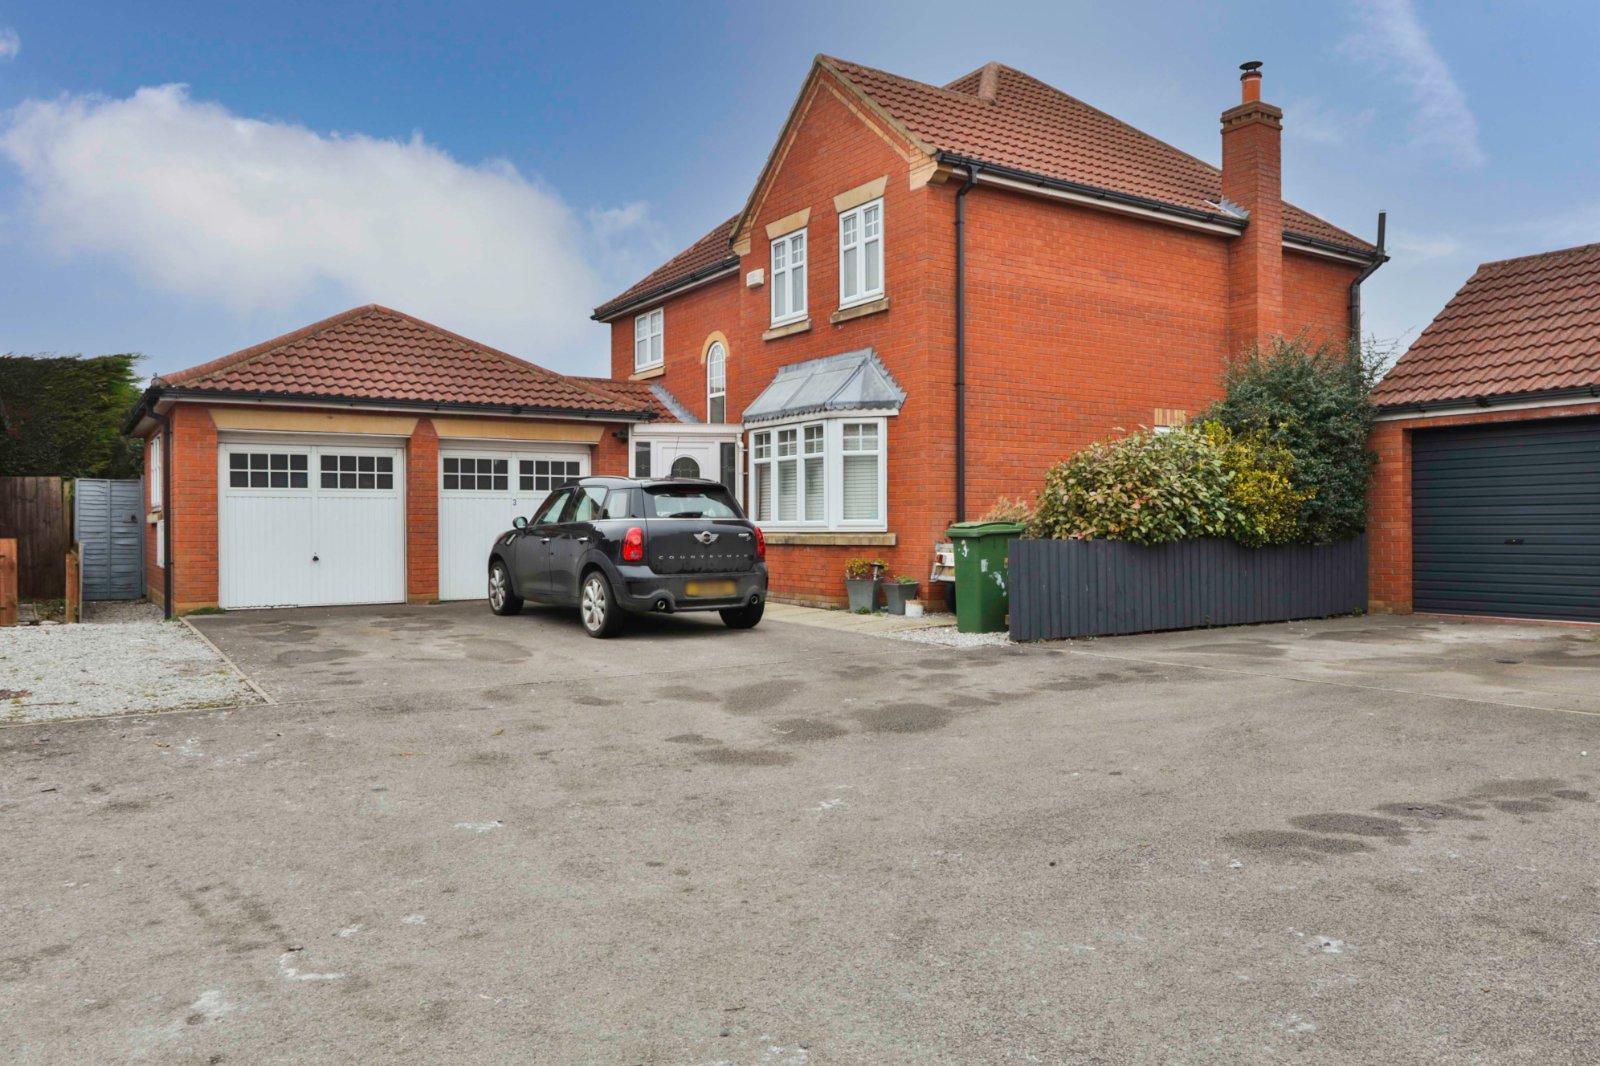 4 bed house for sale in Keld Close, Hedon 0